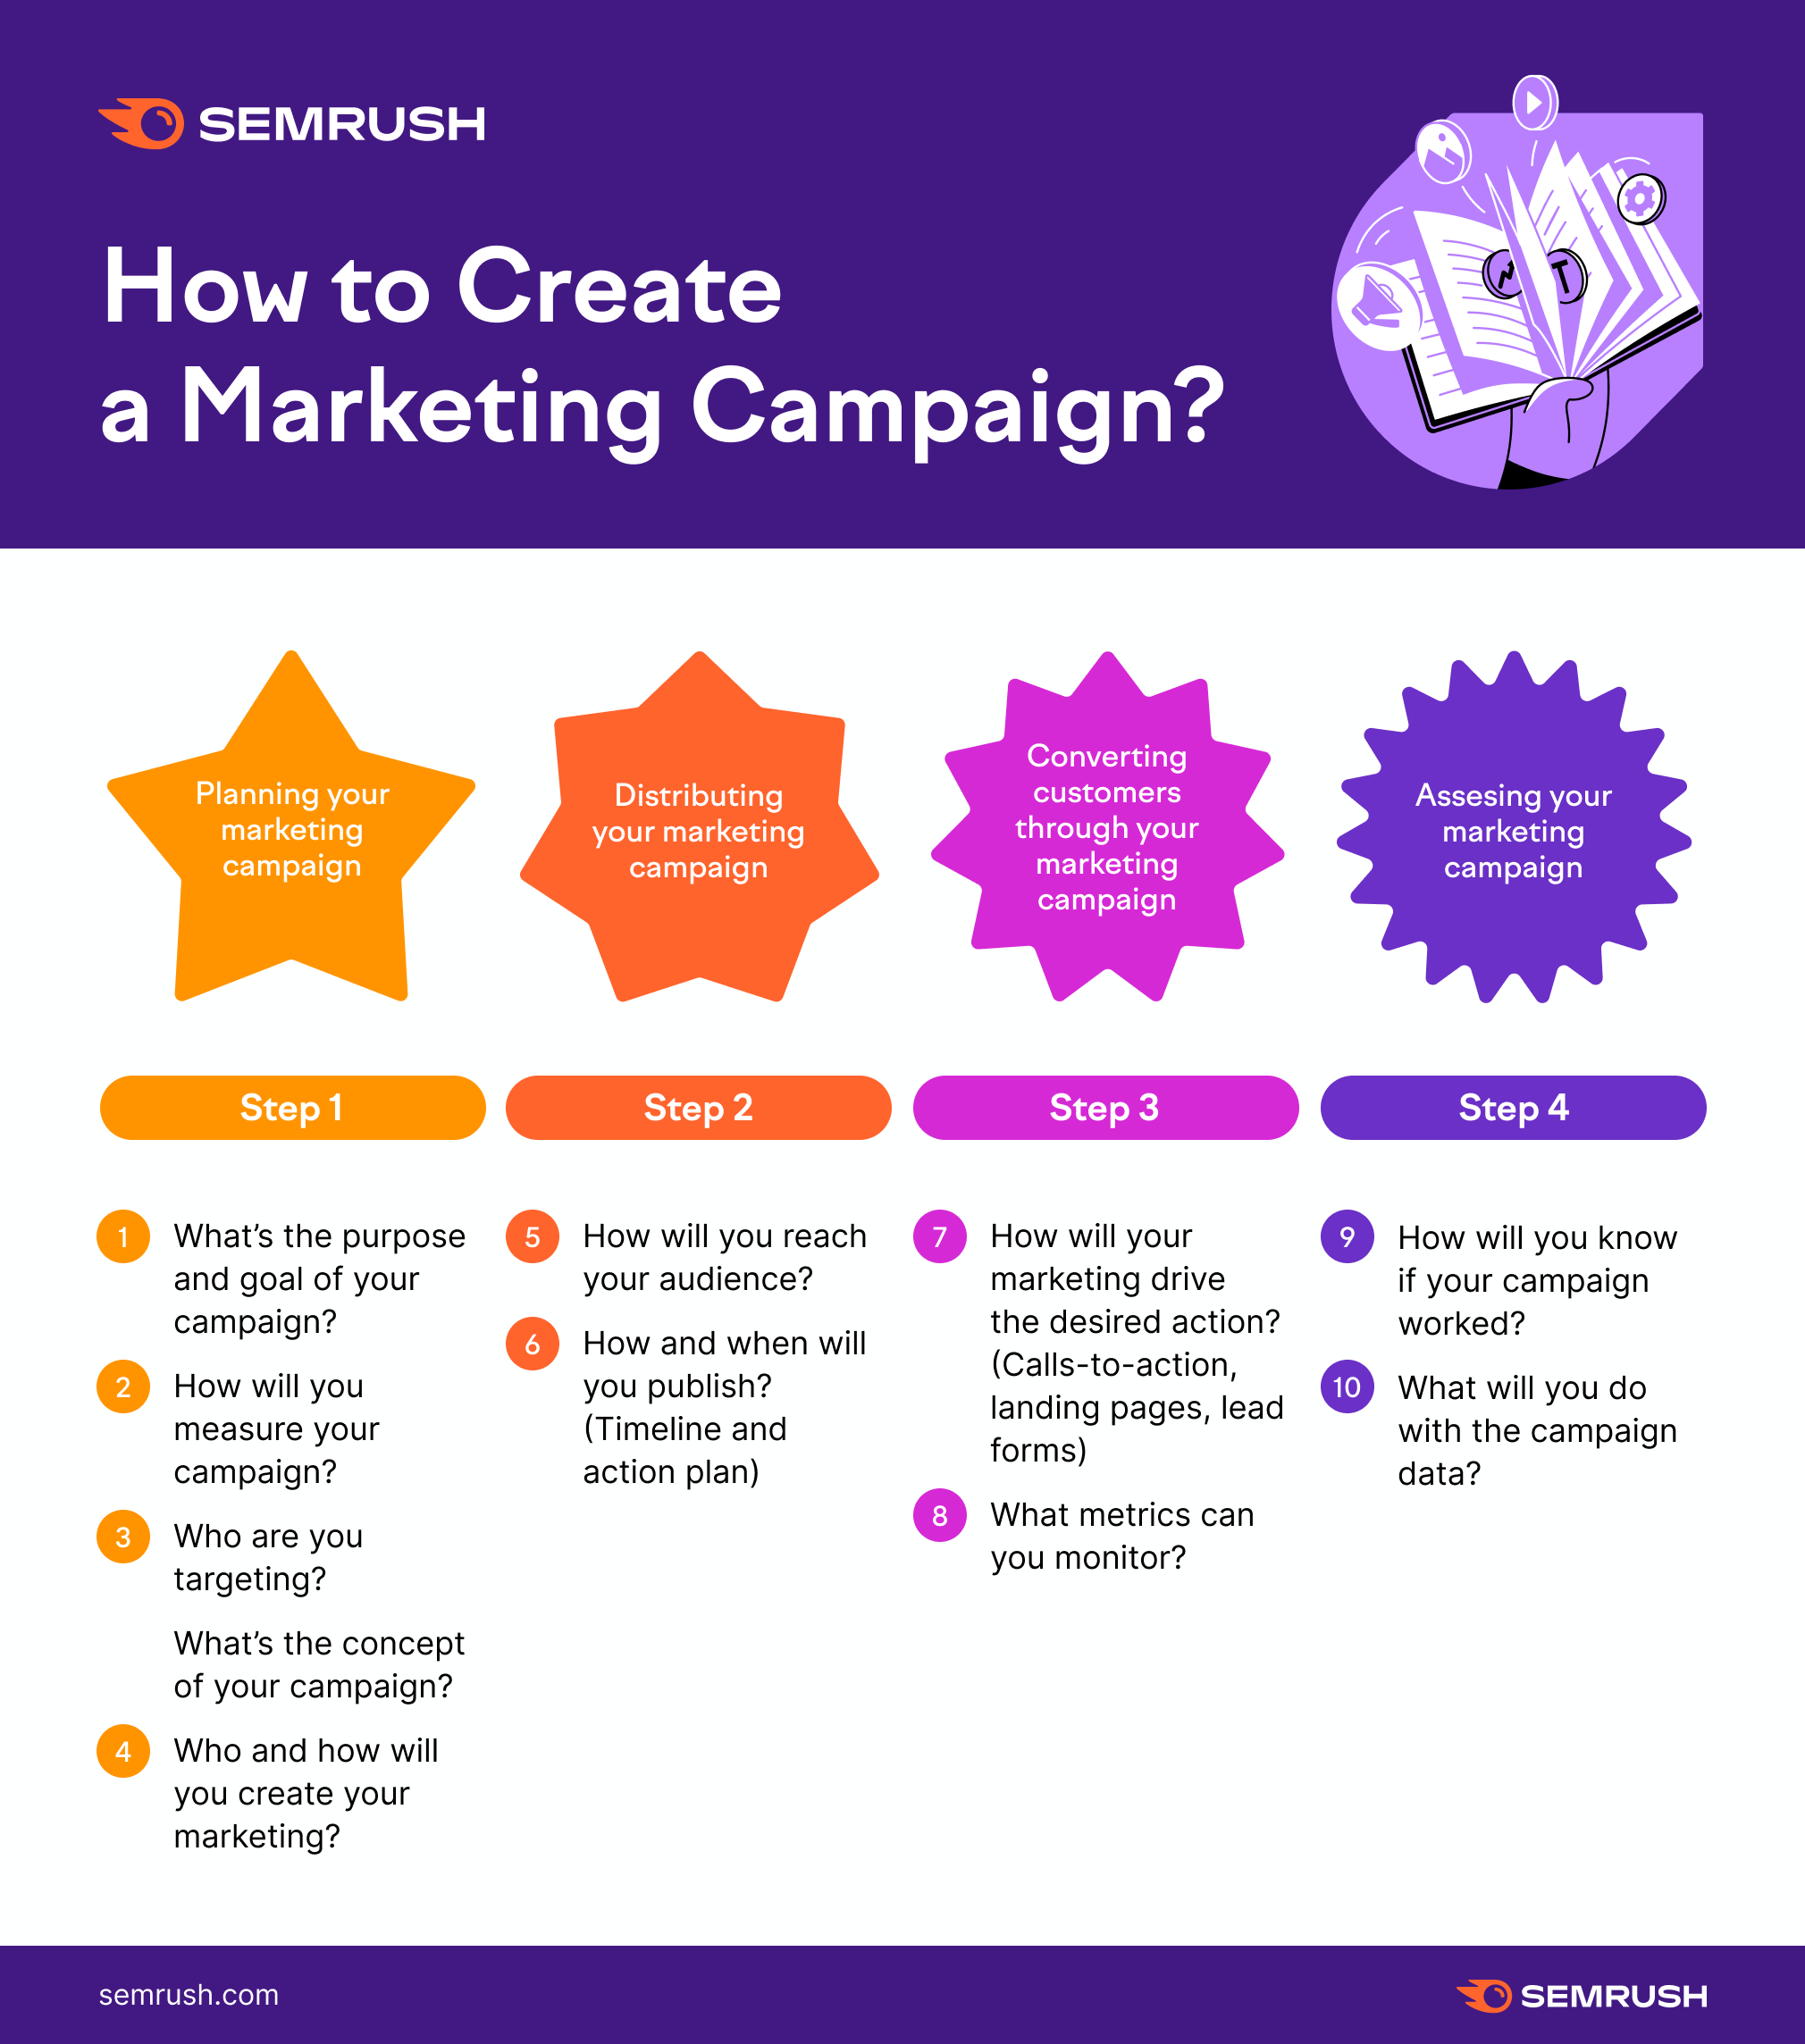 How to create a marketing campaign